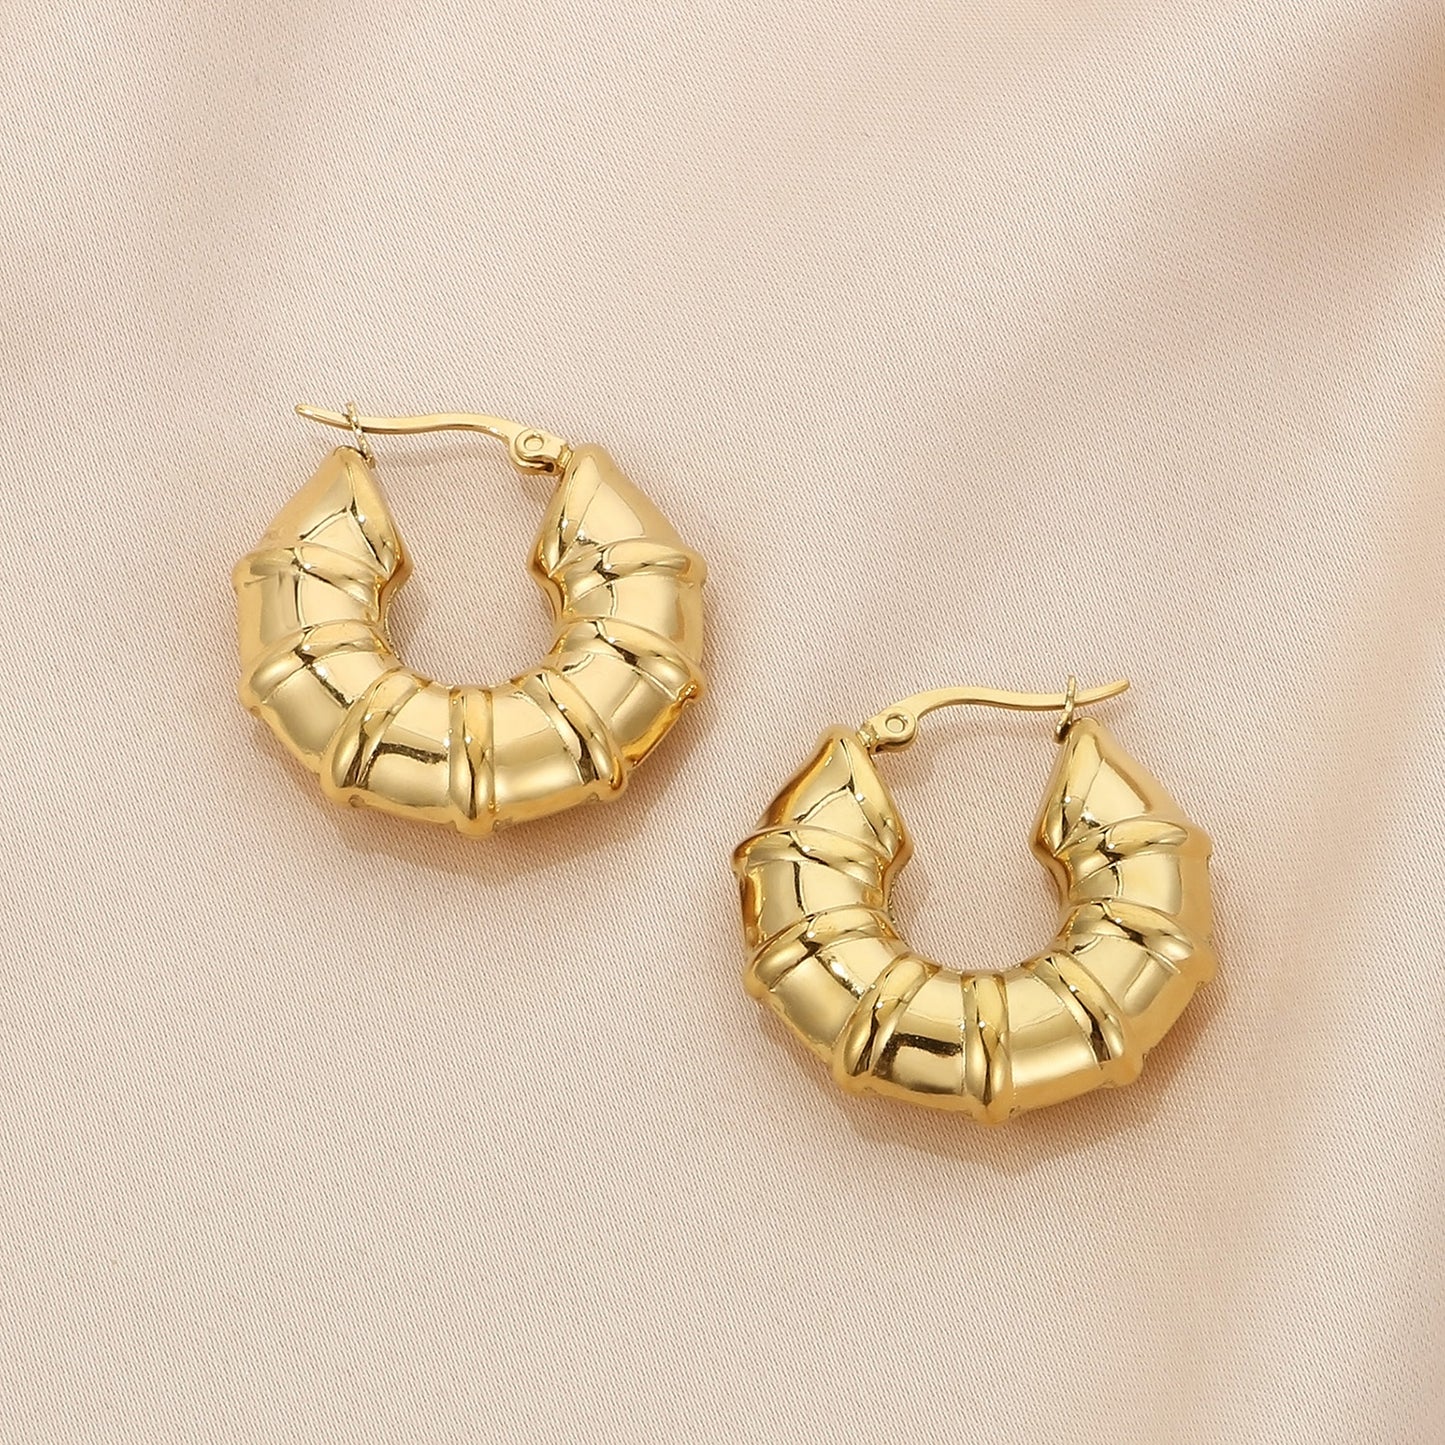 Stainless Steel Hinged Hoop Earrings Style E Gold One Size